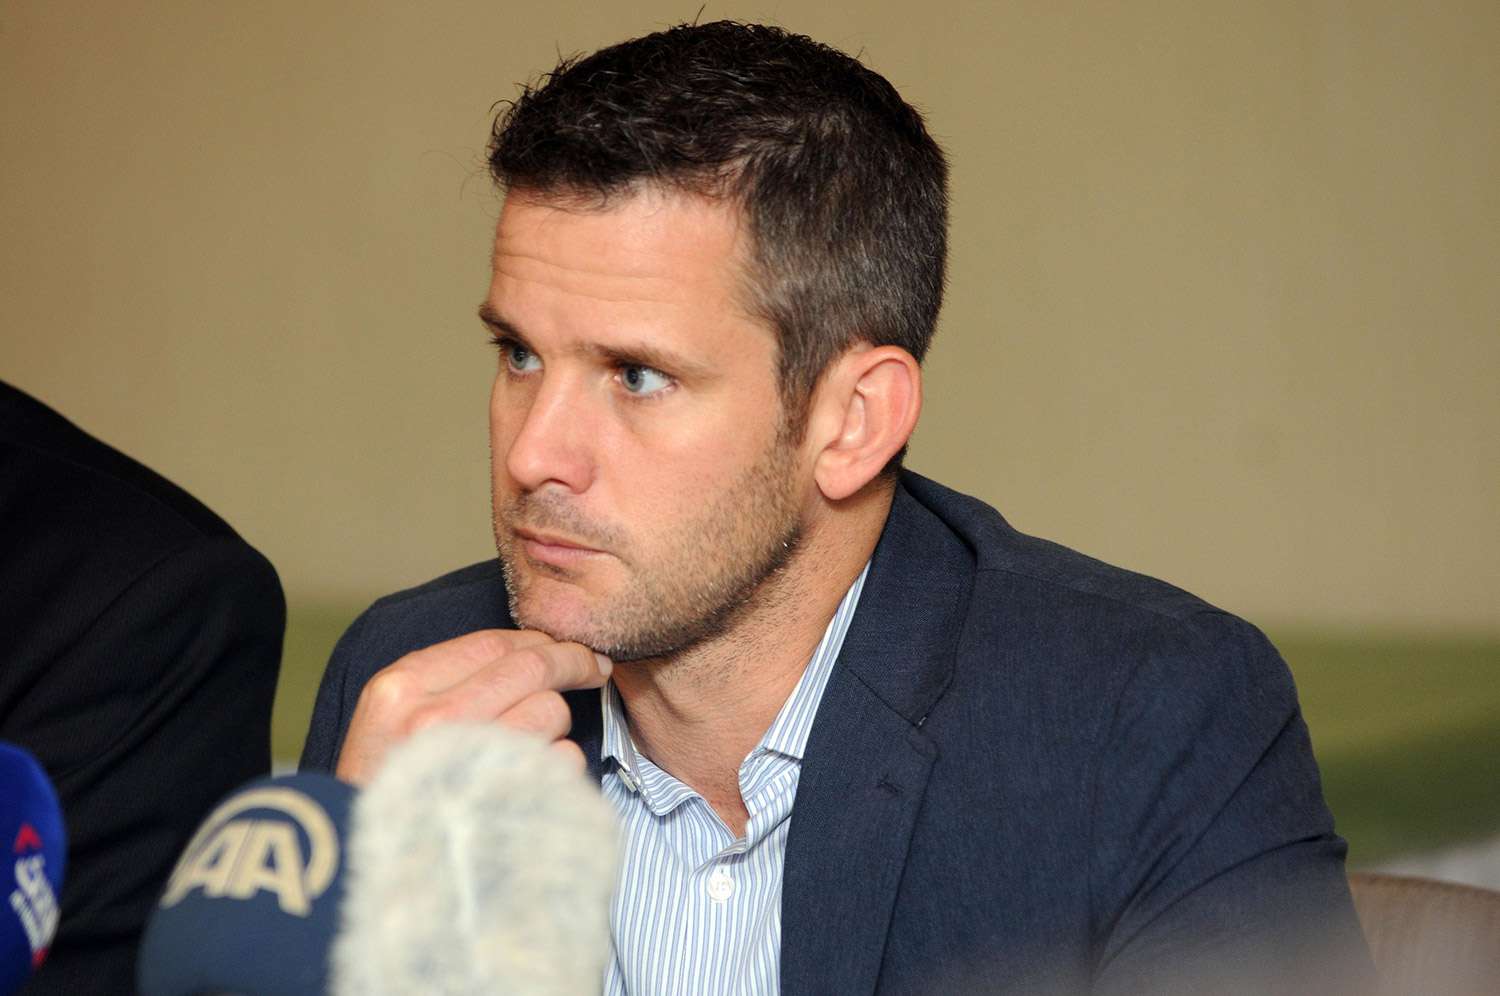 Rep. Kinzinger Warns of Nation's Violence After Receiving Death Threat